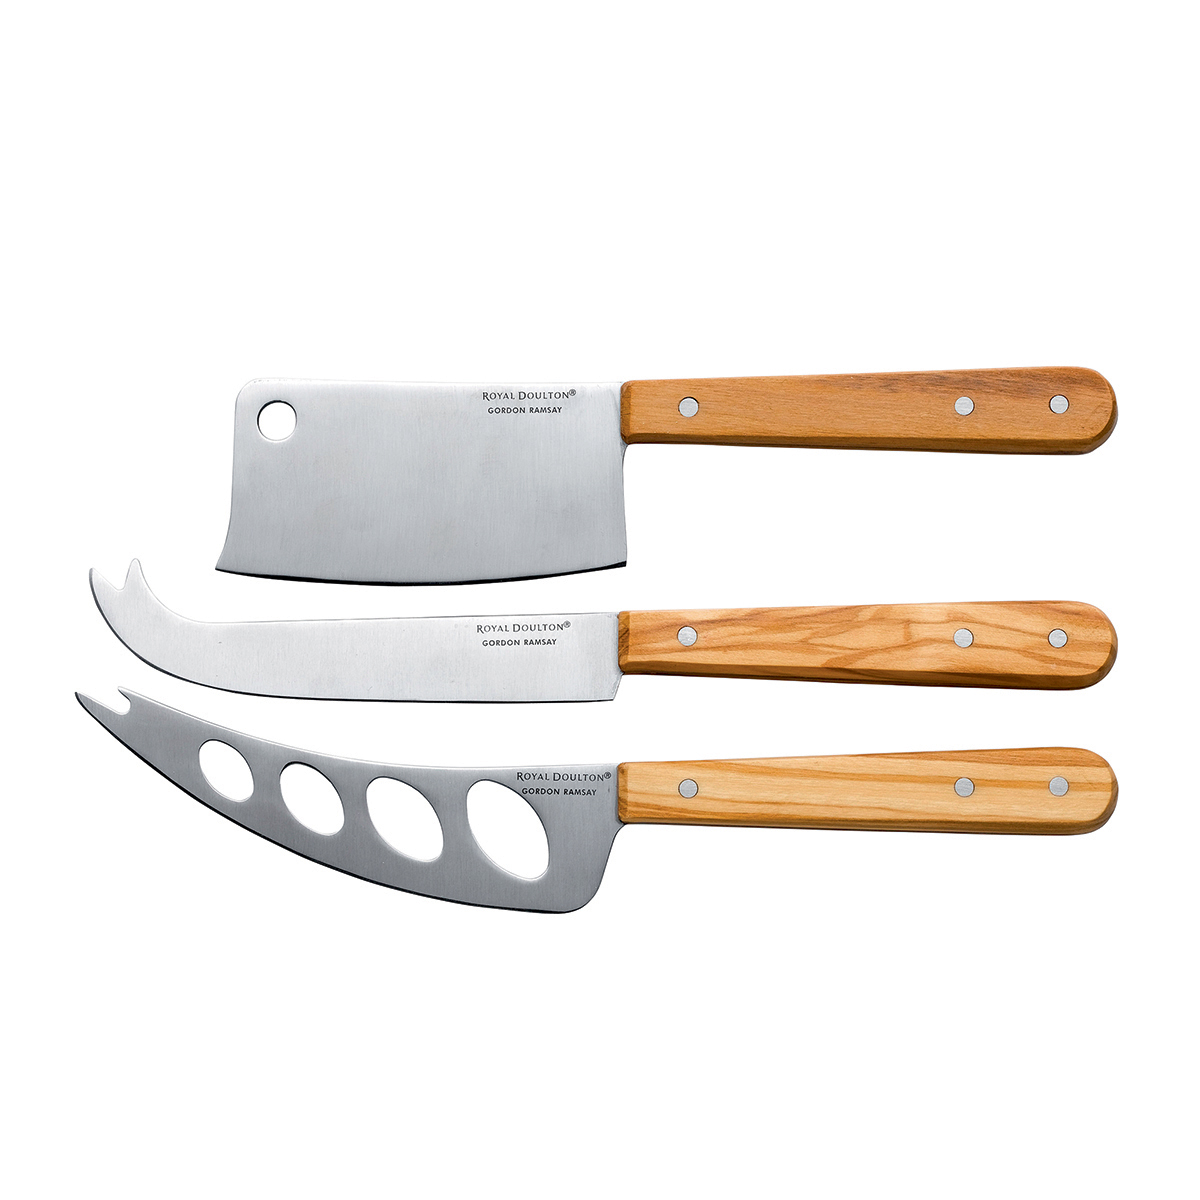 https://cdn11.bigcommerce.com/s-6zwhmb4rdr/images/stencil/original/products/103914/240502/gordon-ramsay-bread-street-cheese-knives-set-of-3-by-royal-doulton-10__94069.1652212157.jpg